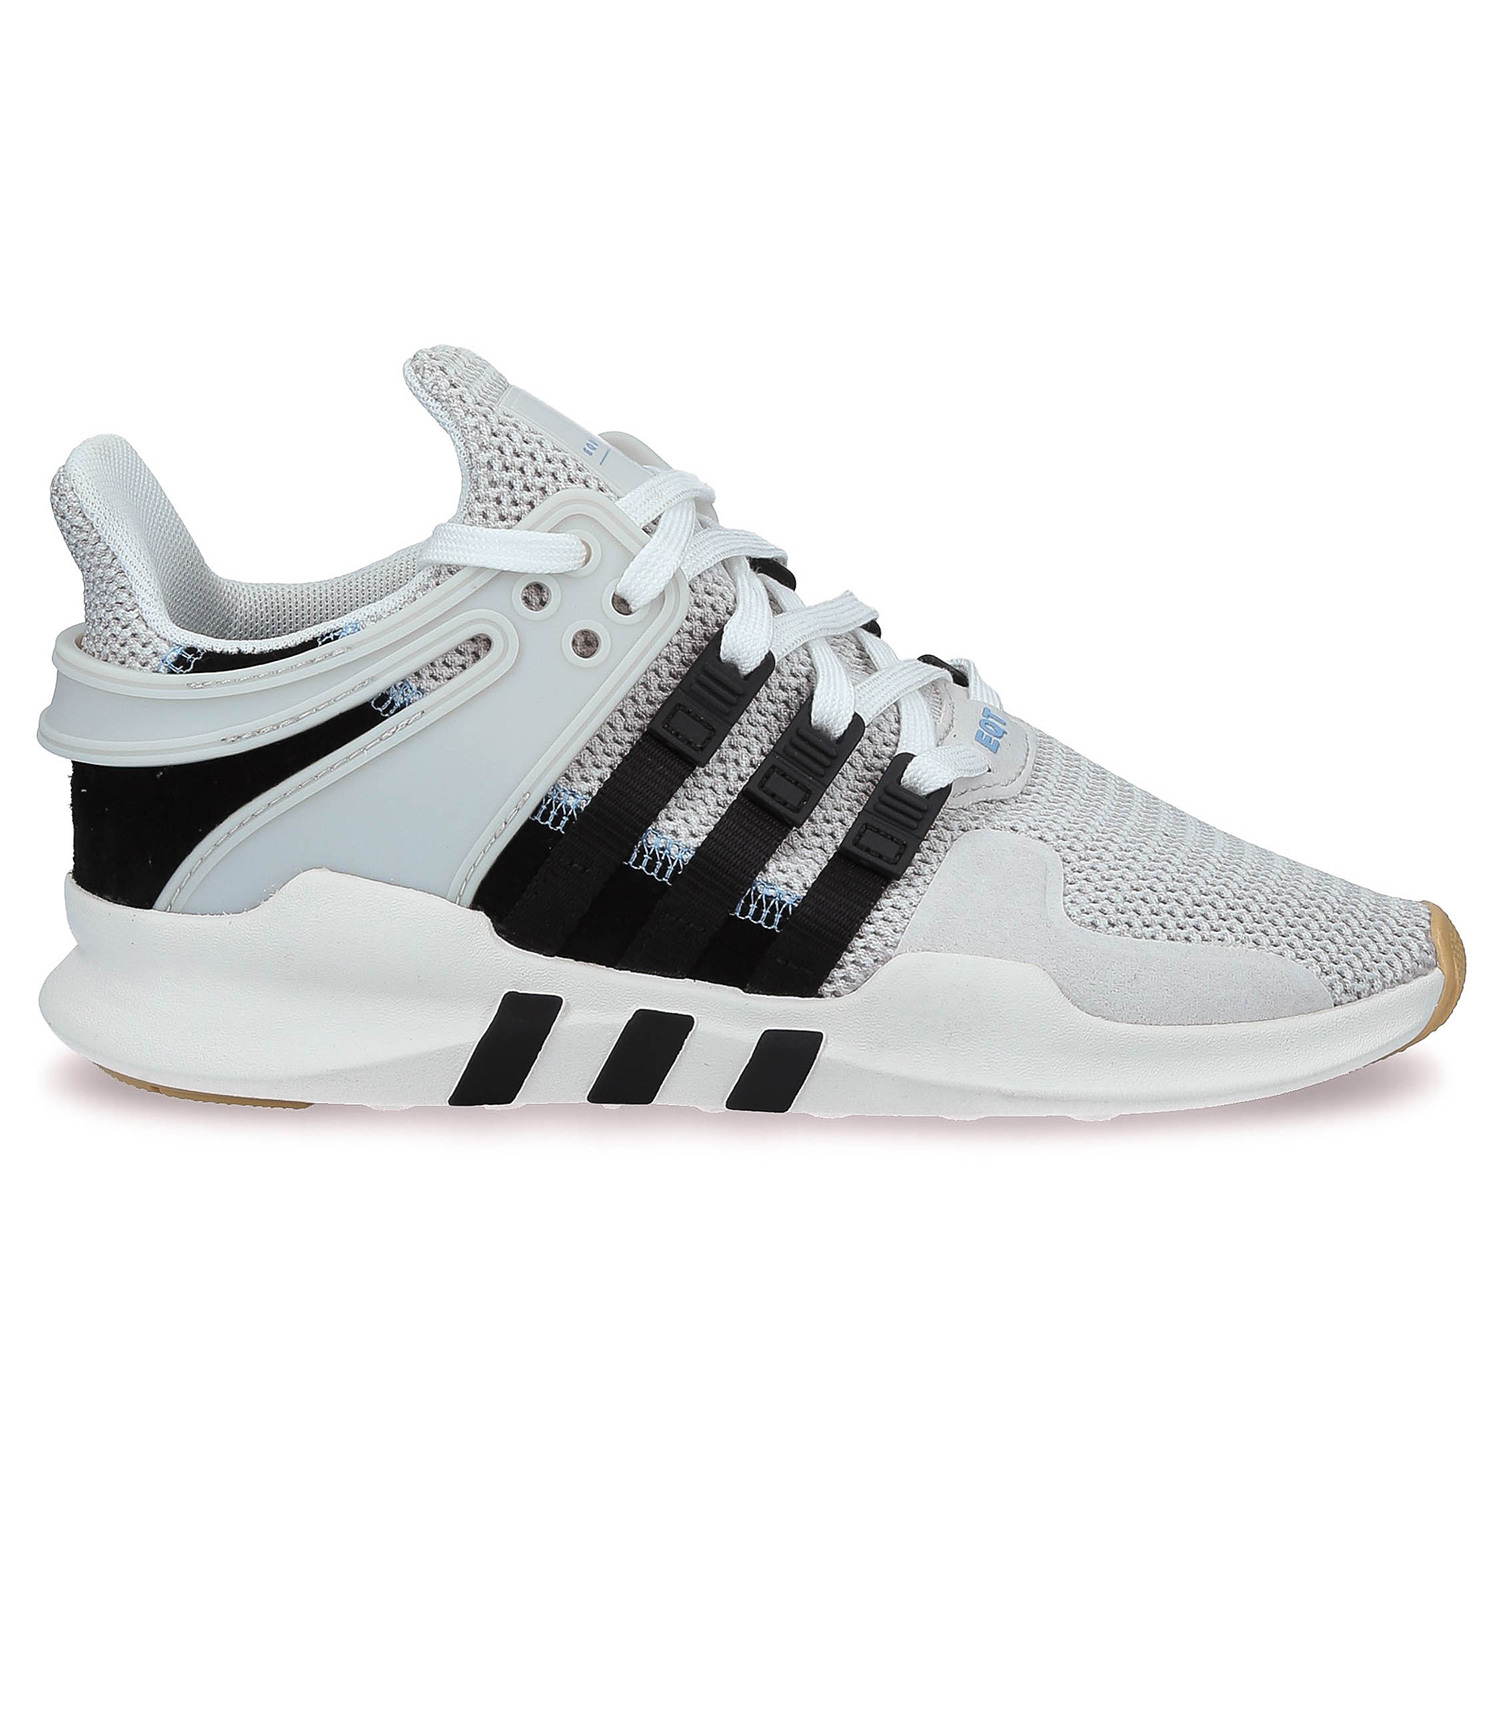 adidas eqt support adv femme or